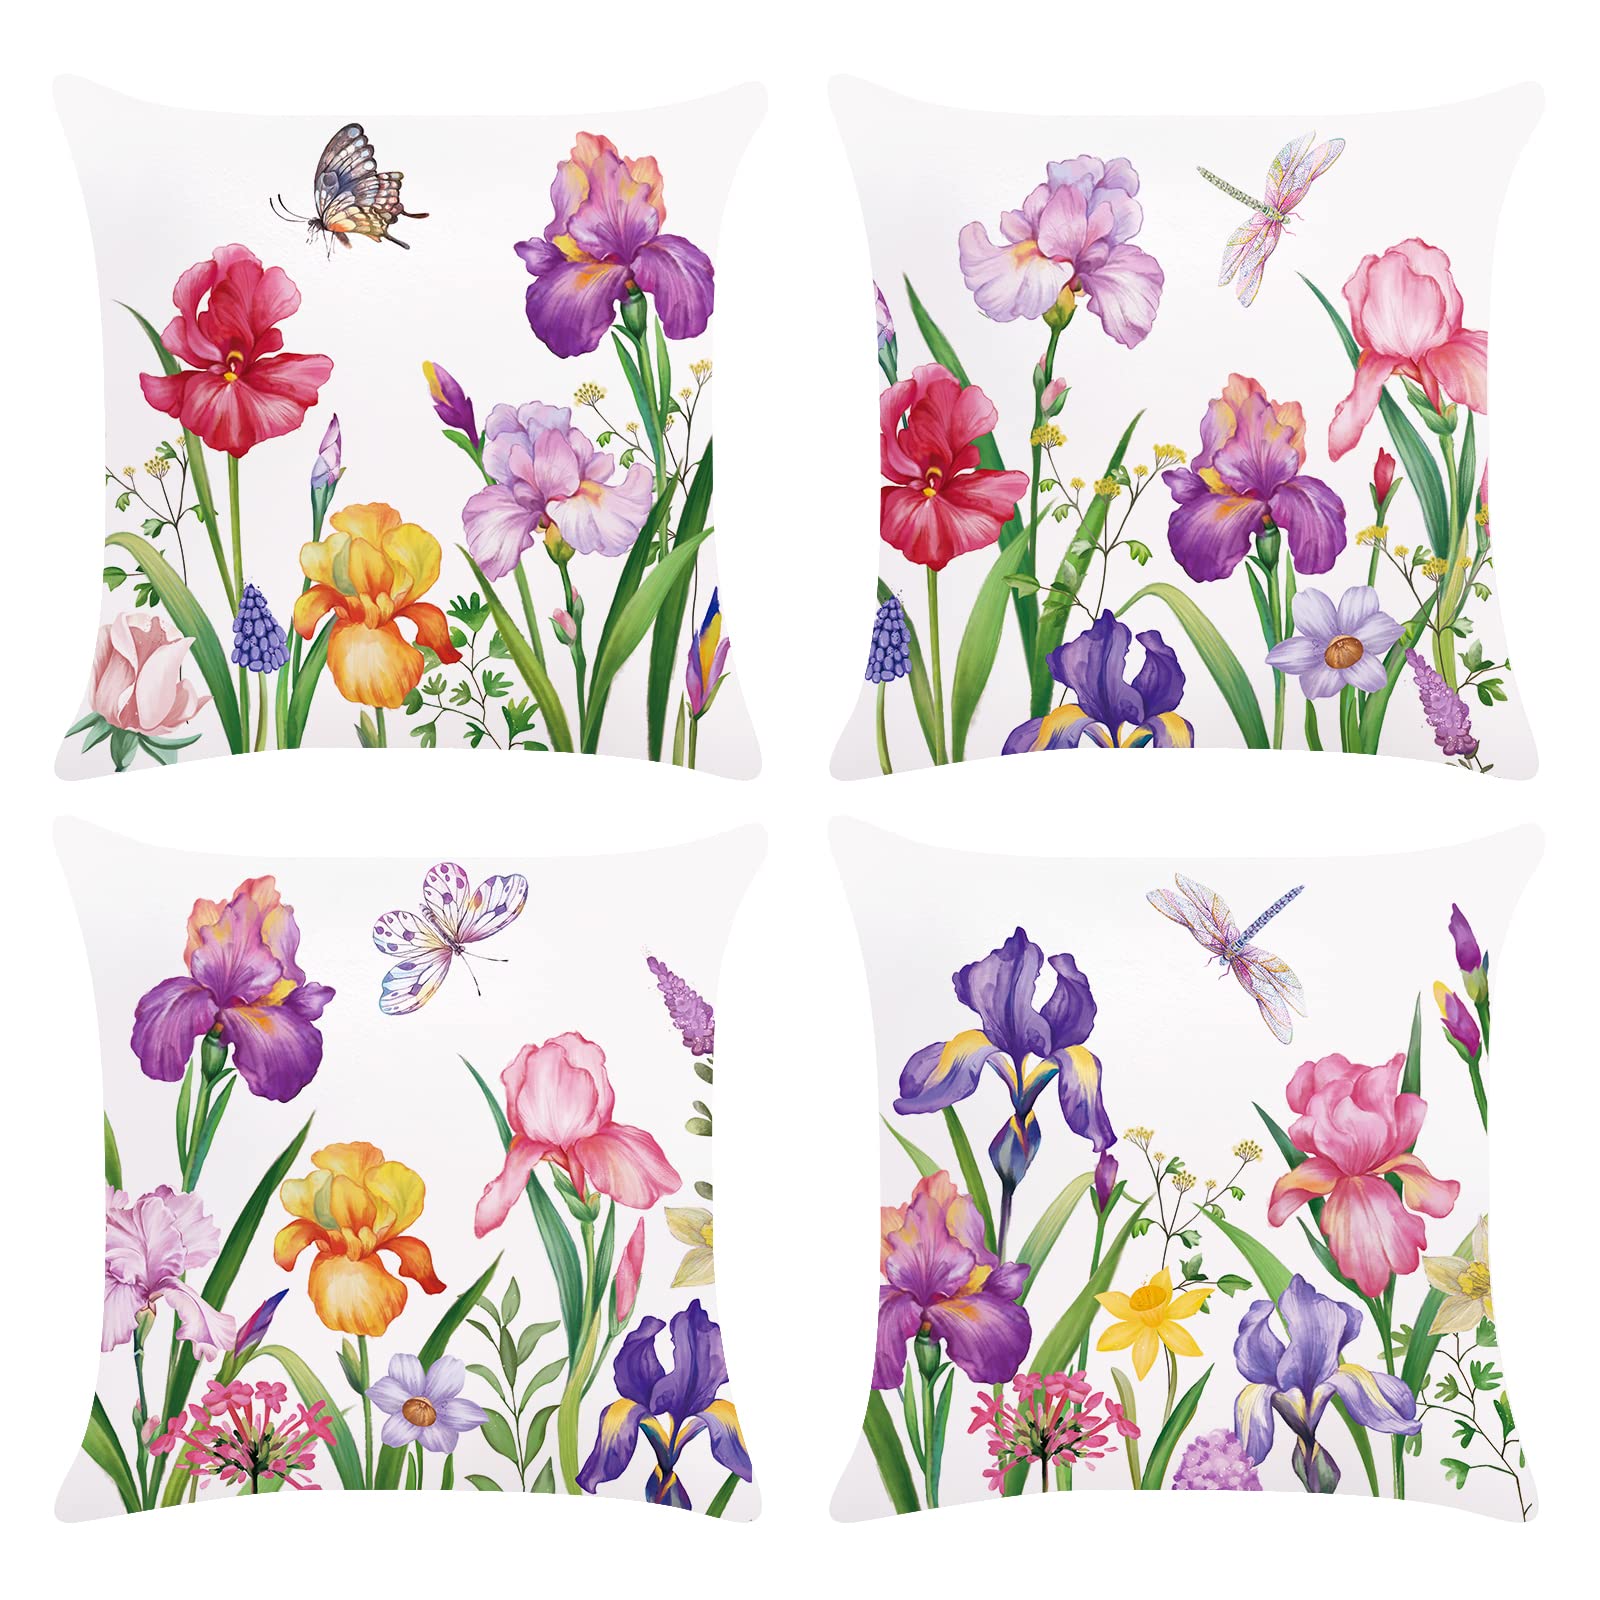 Bonhause Garden Flower Cushion Covers 18 x 18 Inch Set of 4 Narcissus Iris Floral Decorative Throw Pillow Covers Soft Velvet Pillowcases for Sofa Couch Car Bedroom Indoor Outdoor Decor, 45cm x 45cm